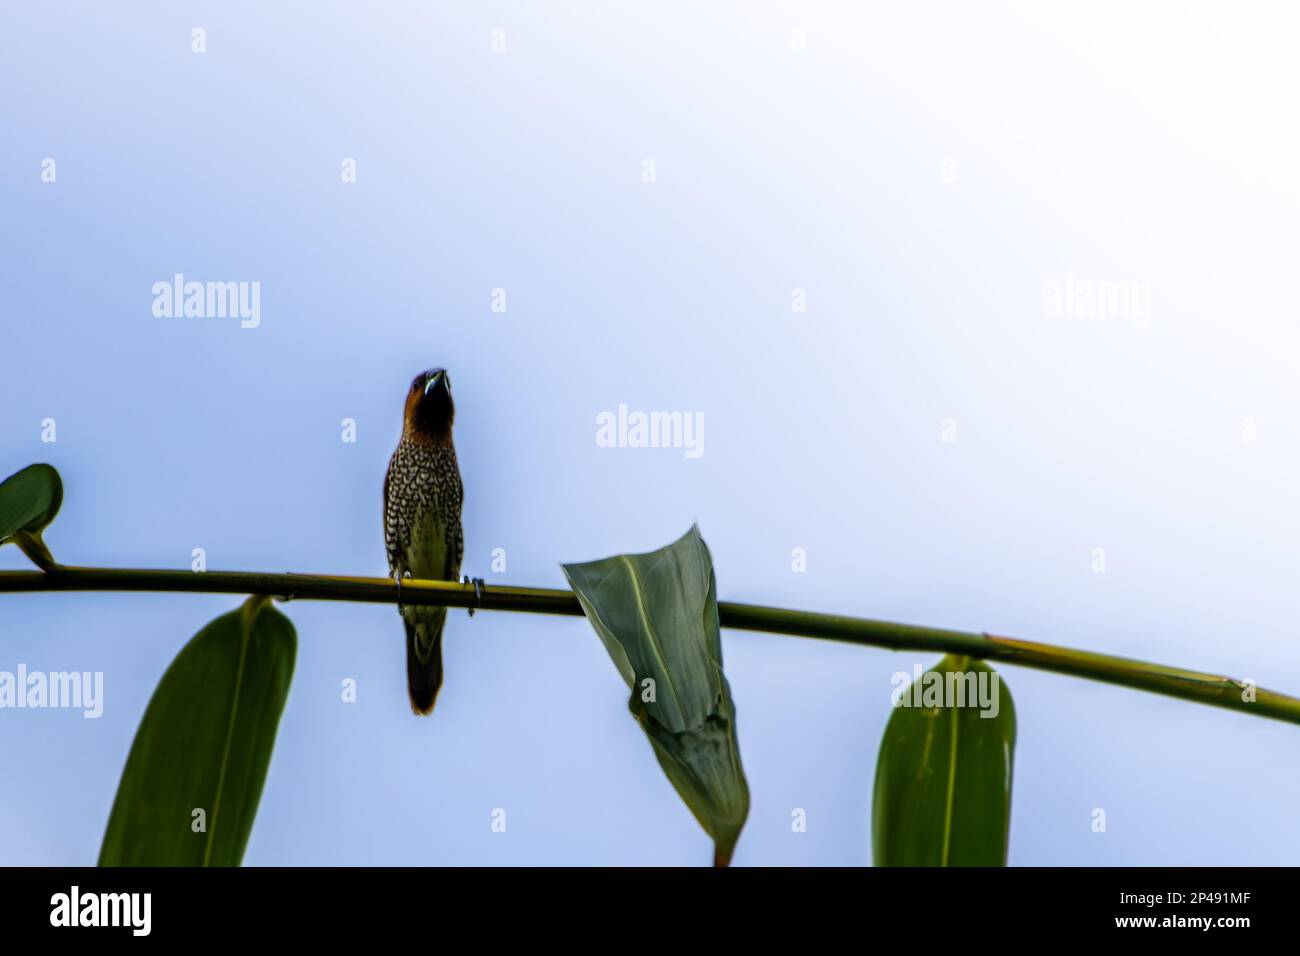 A bird of the type Estrildidae sparrow or estrildid finches perched on a branch on a sunny morning, background in the form of blurred green leaves in Stock Photo